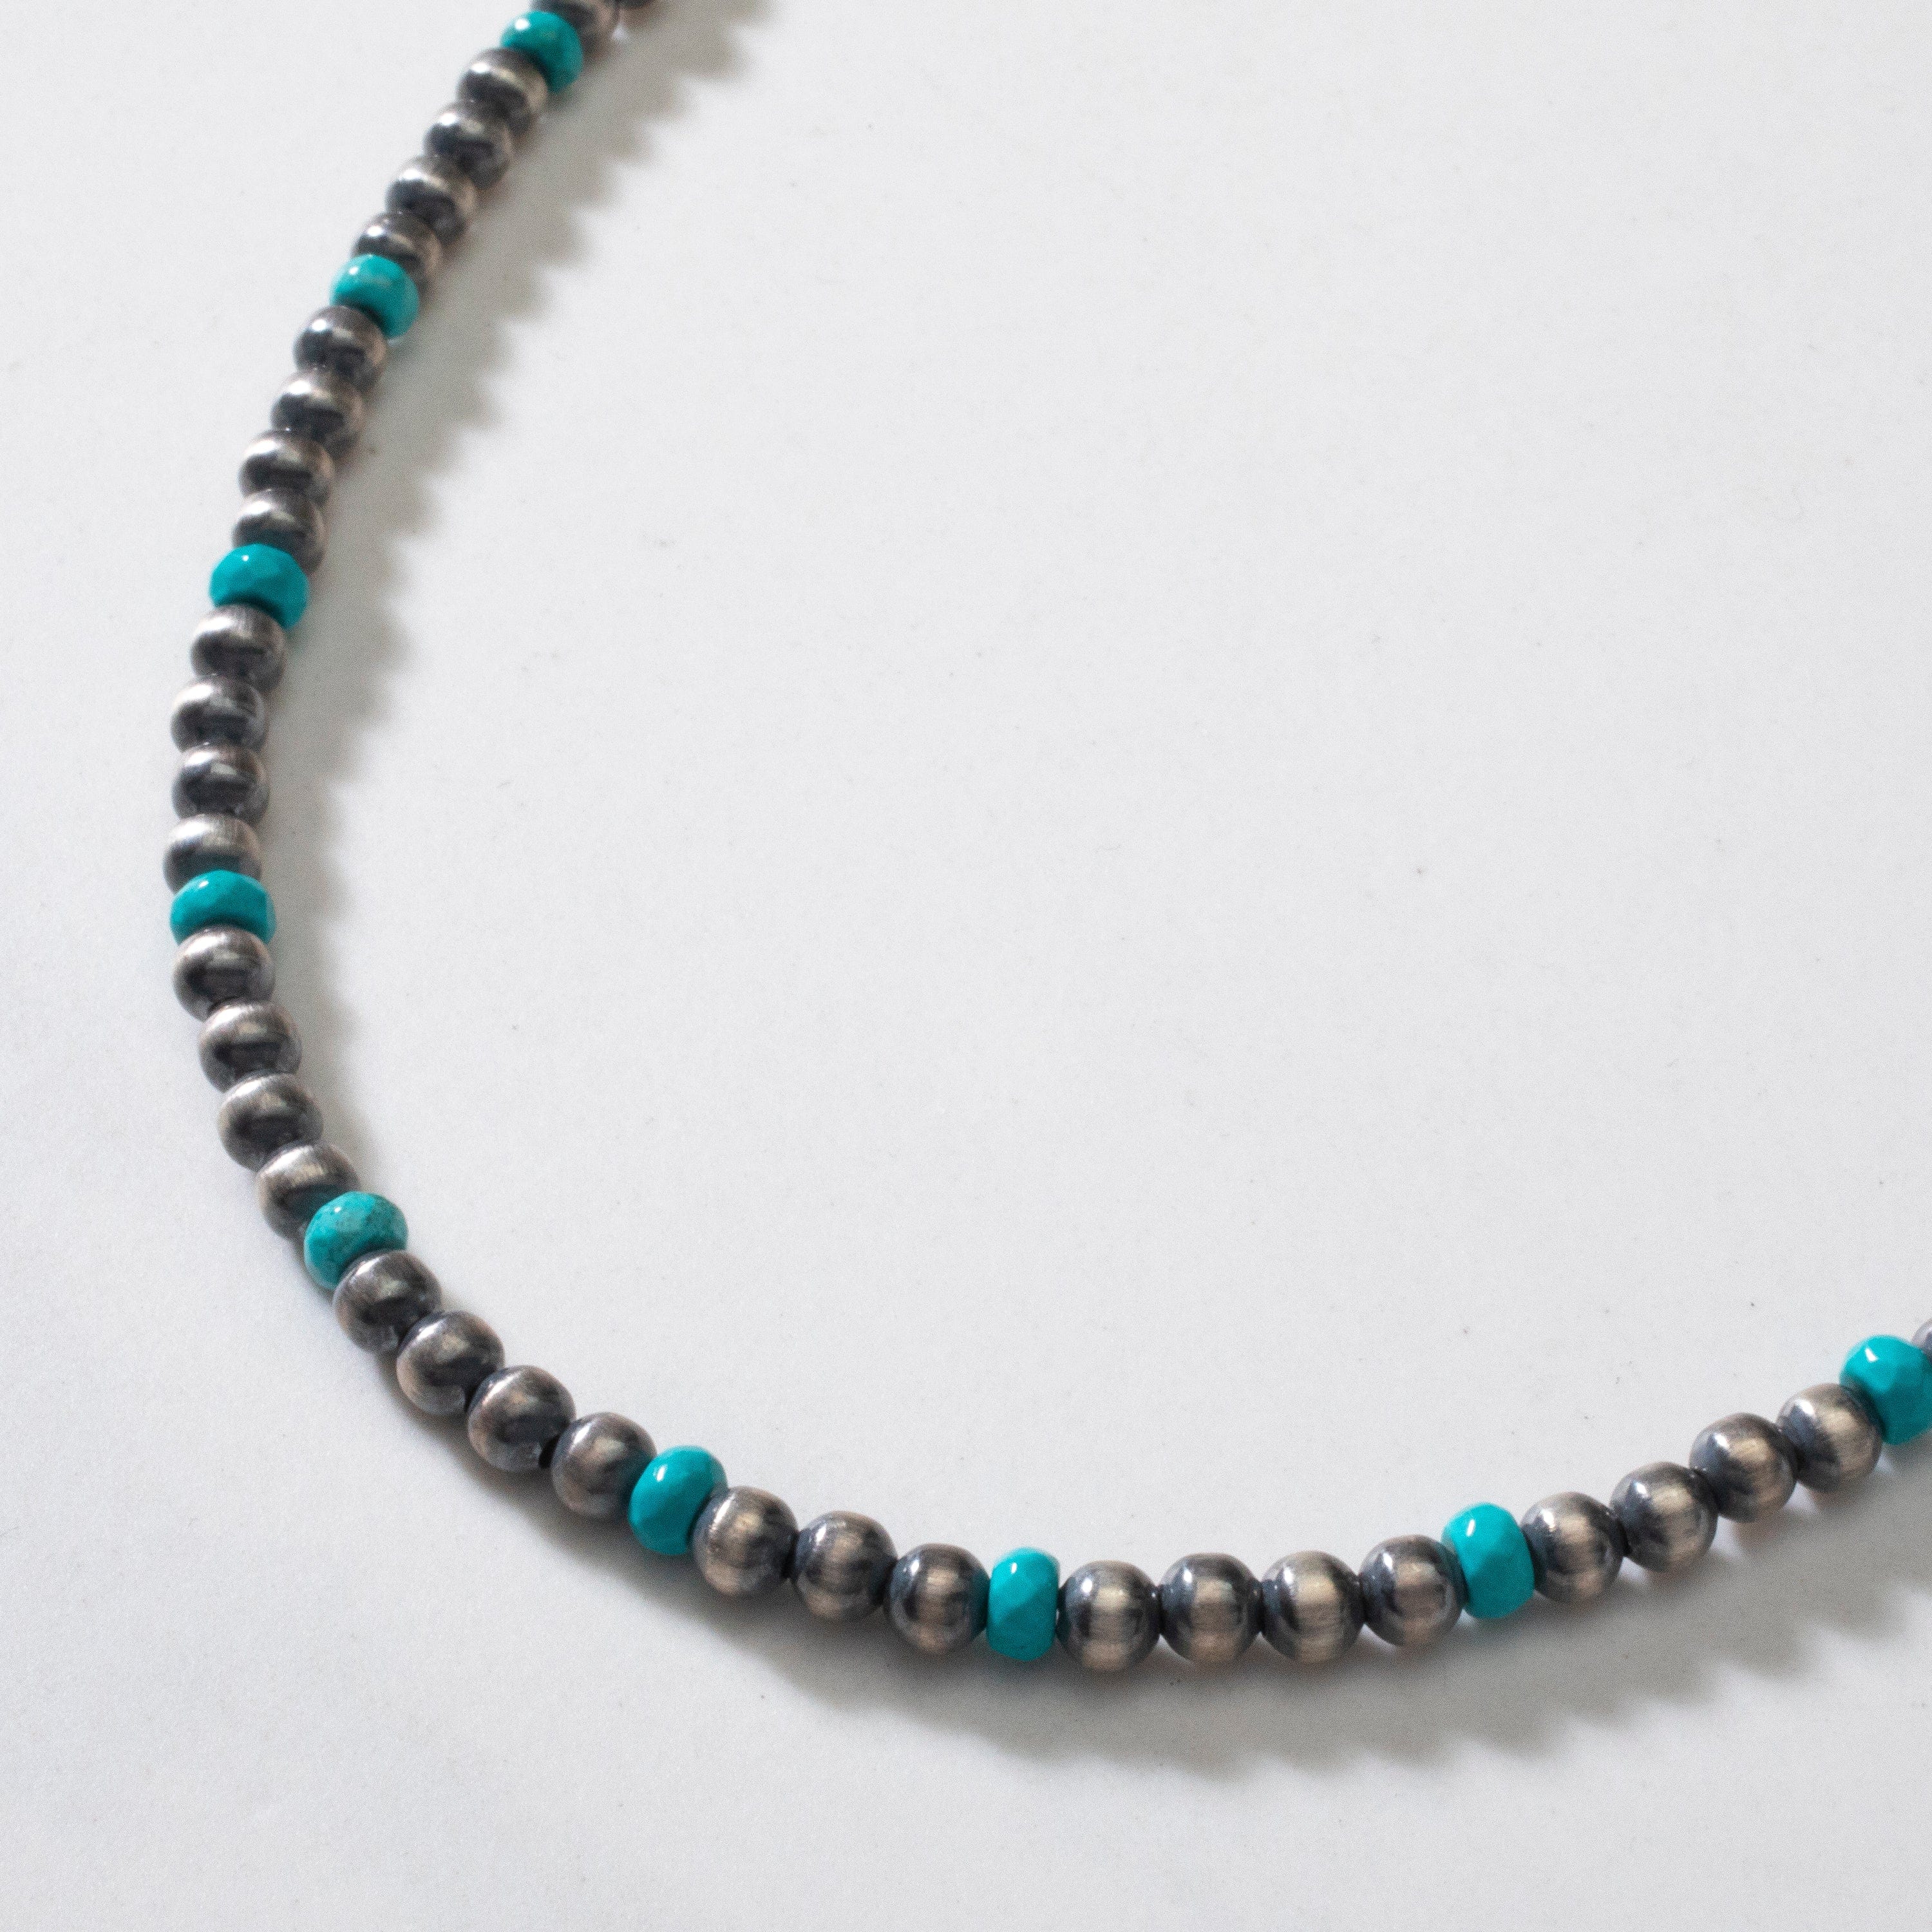 Kalifano Native American Jewelry 16" Single Strand 4mm Navajo Pearl & Turquoise USA Native American Made 925 Sterling Silver Necklace NAN450.012